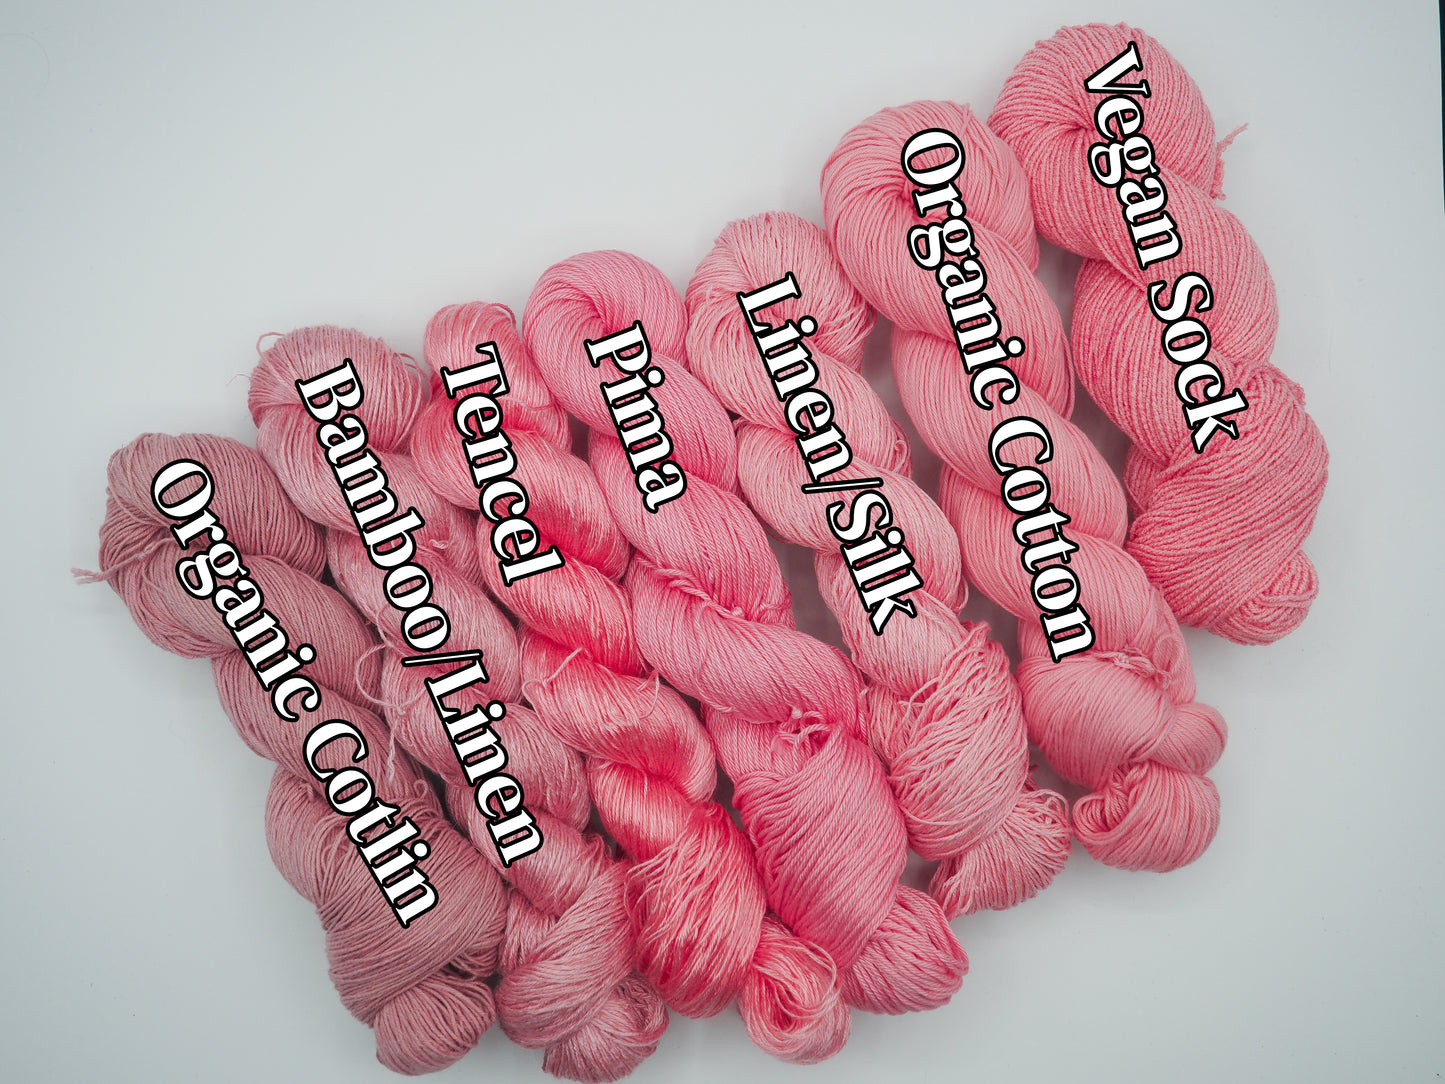 Spring Half Skeins (50g) - dyed to order please allow 3-4 weeks for dyeing